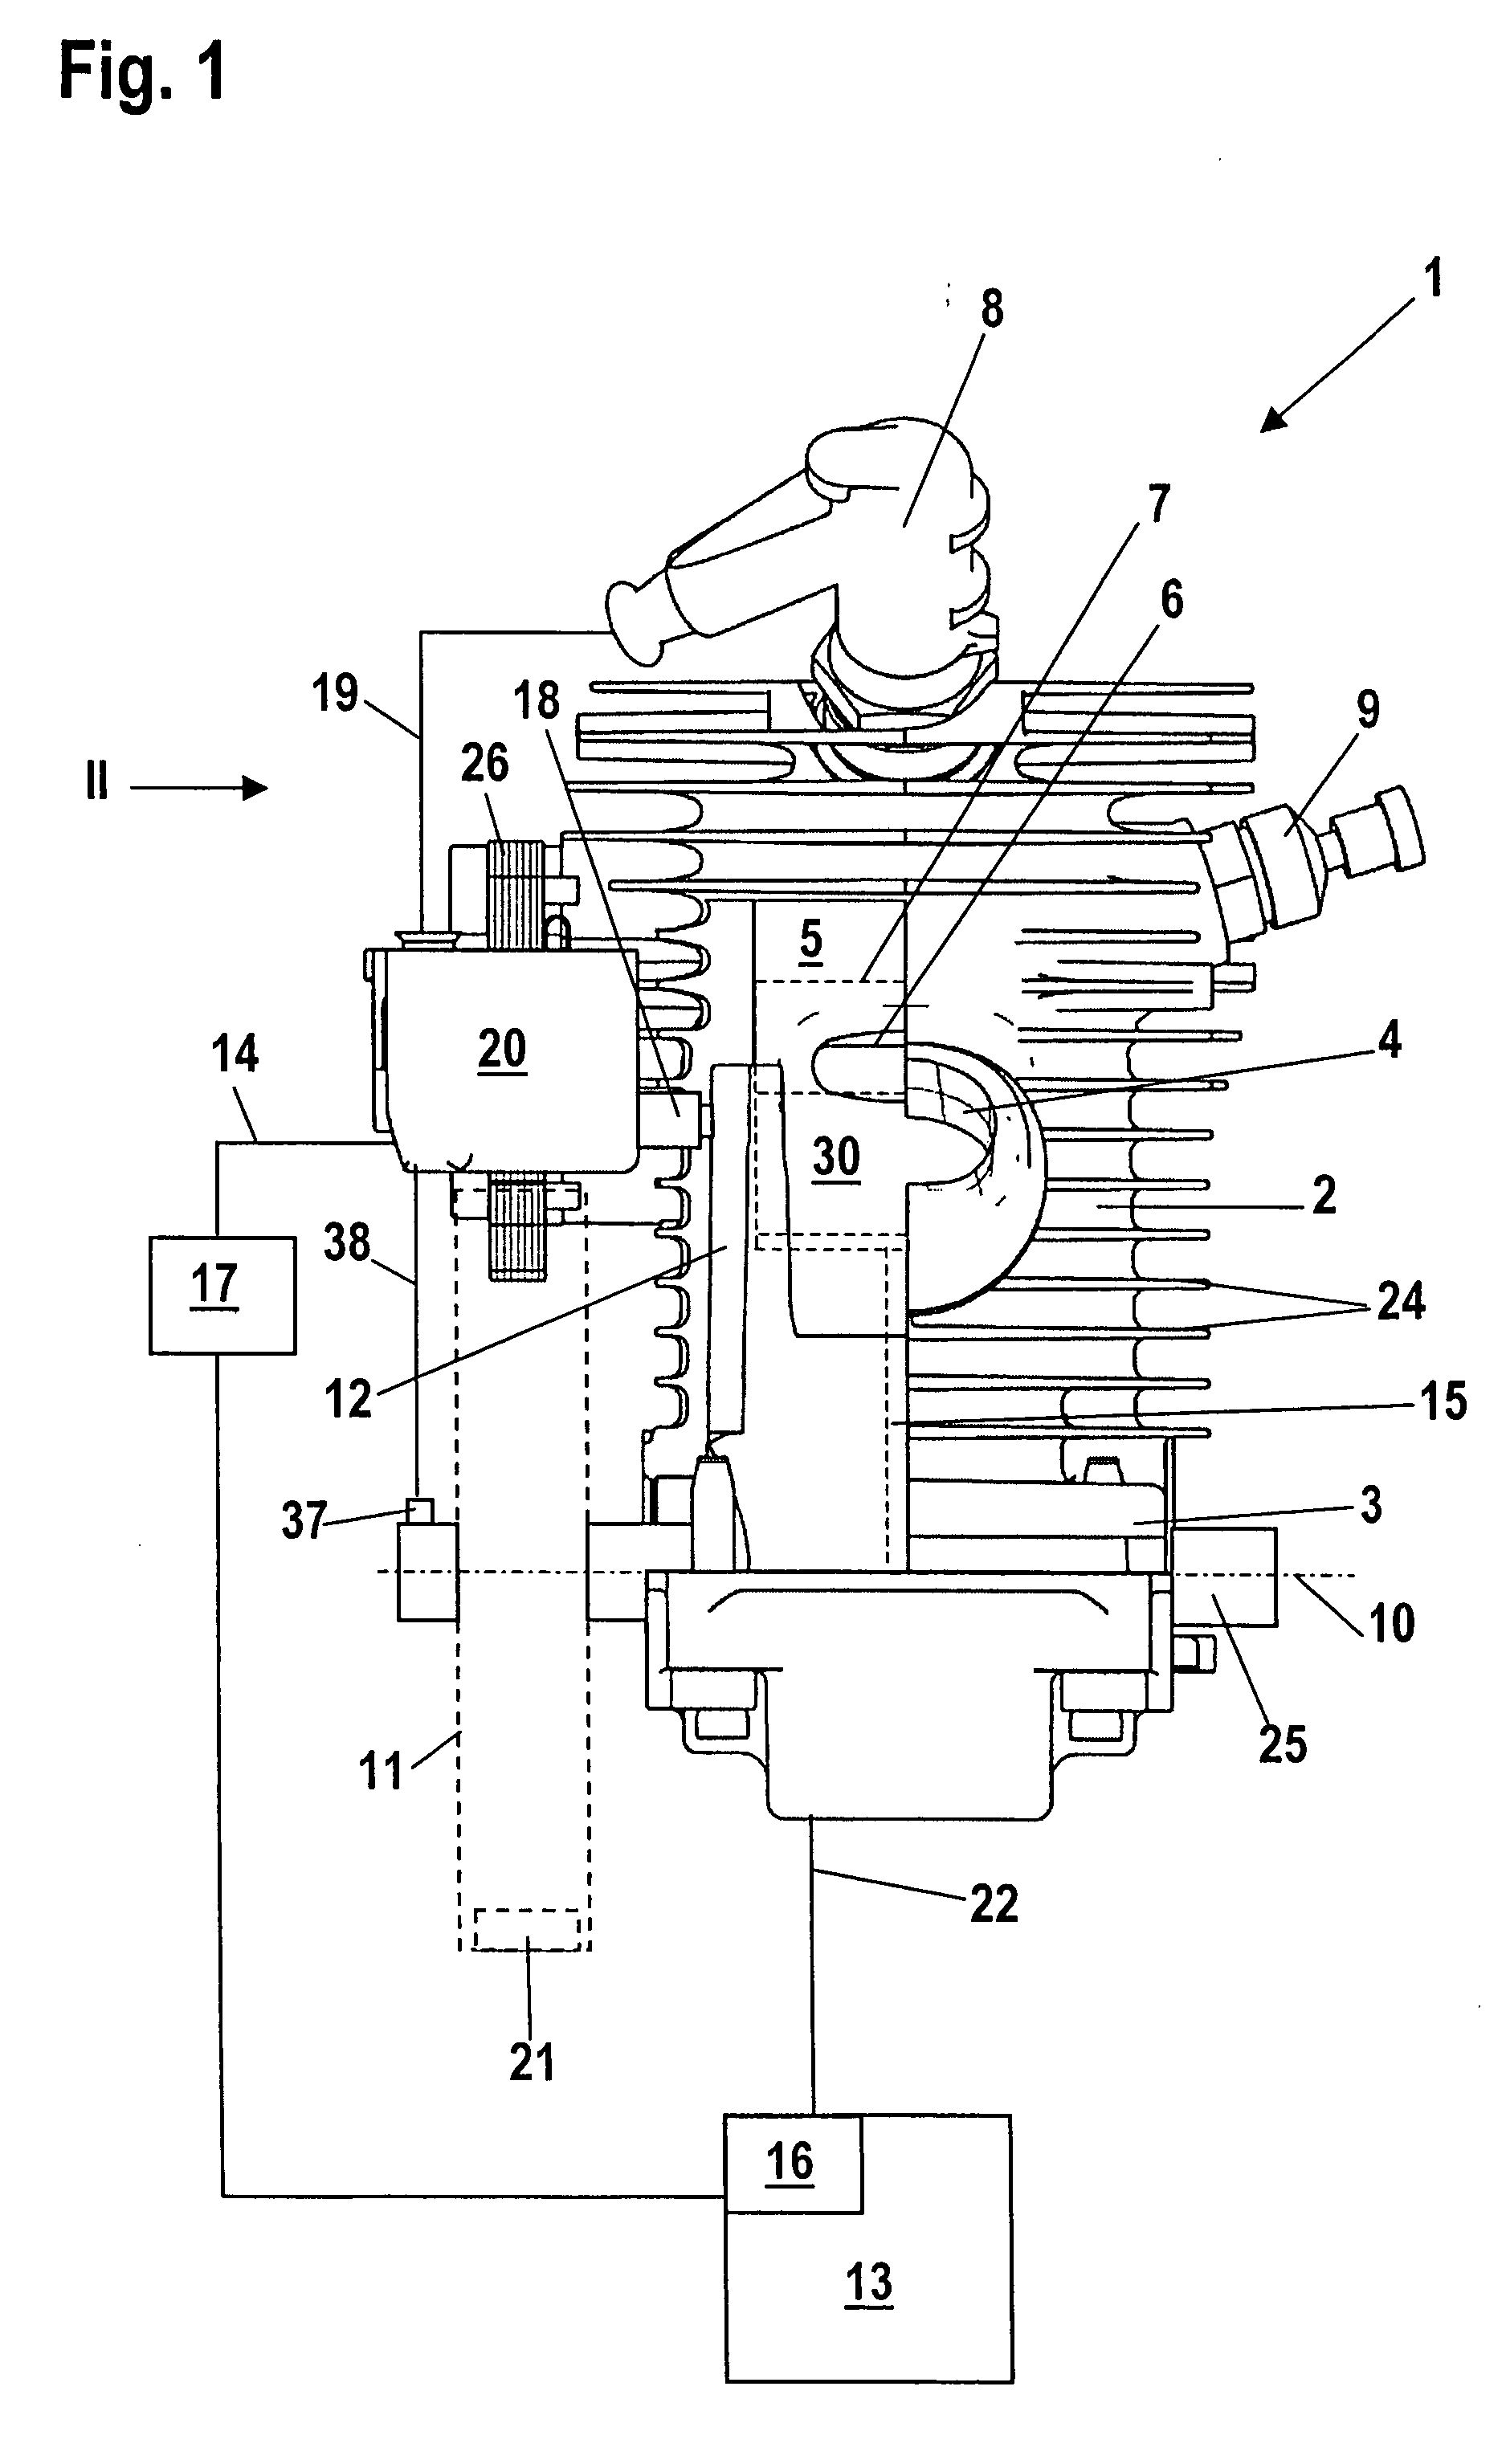 Method of operating a single cylinder two-stroke engine